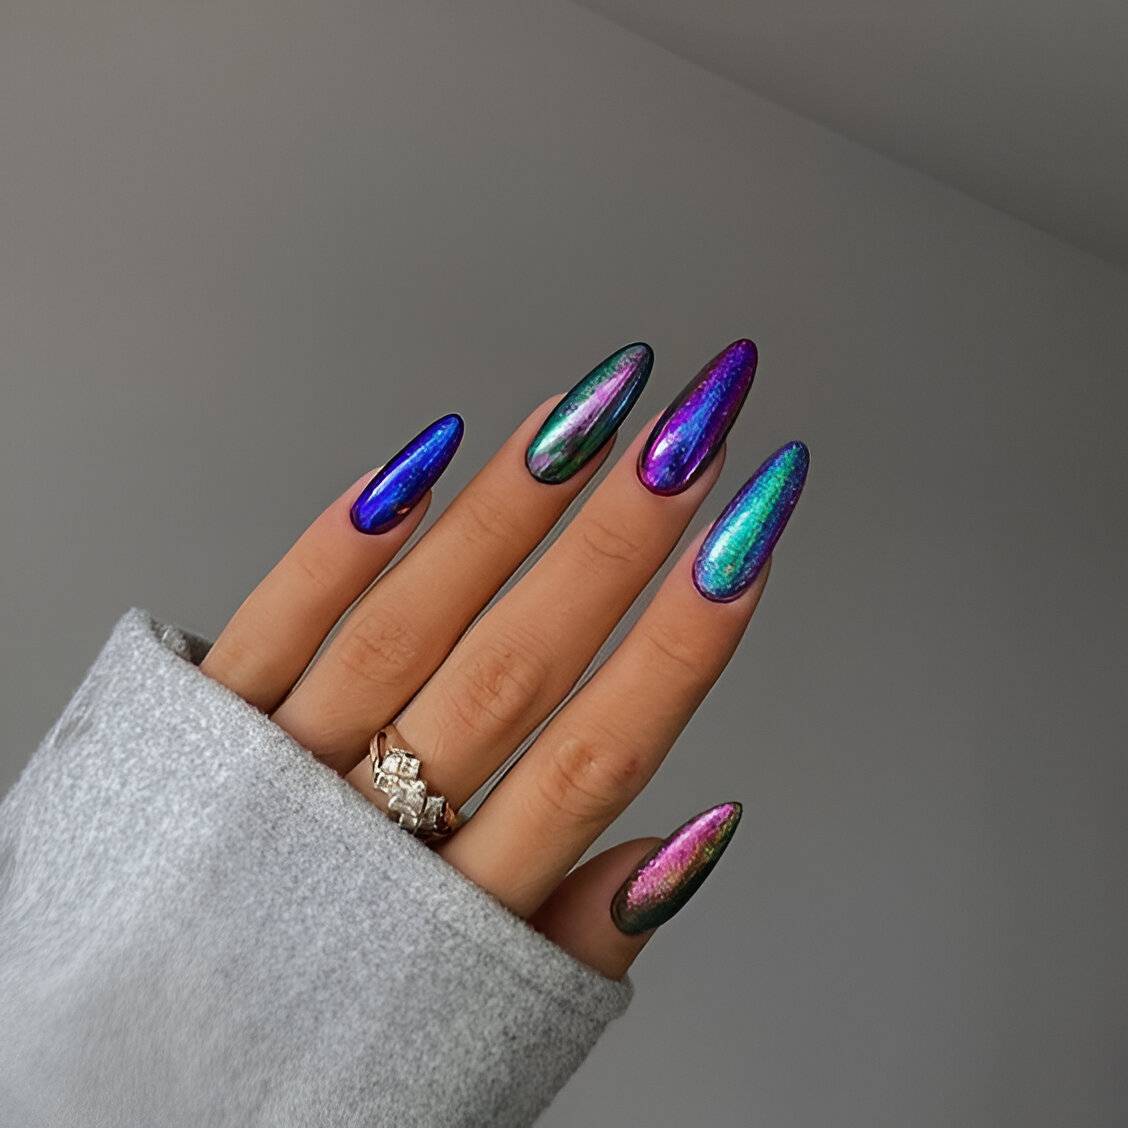 30 Chic Chrome Nail Designs For The Ultimate Glam Look - 241